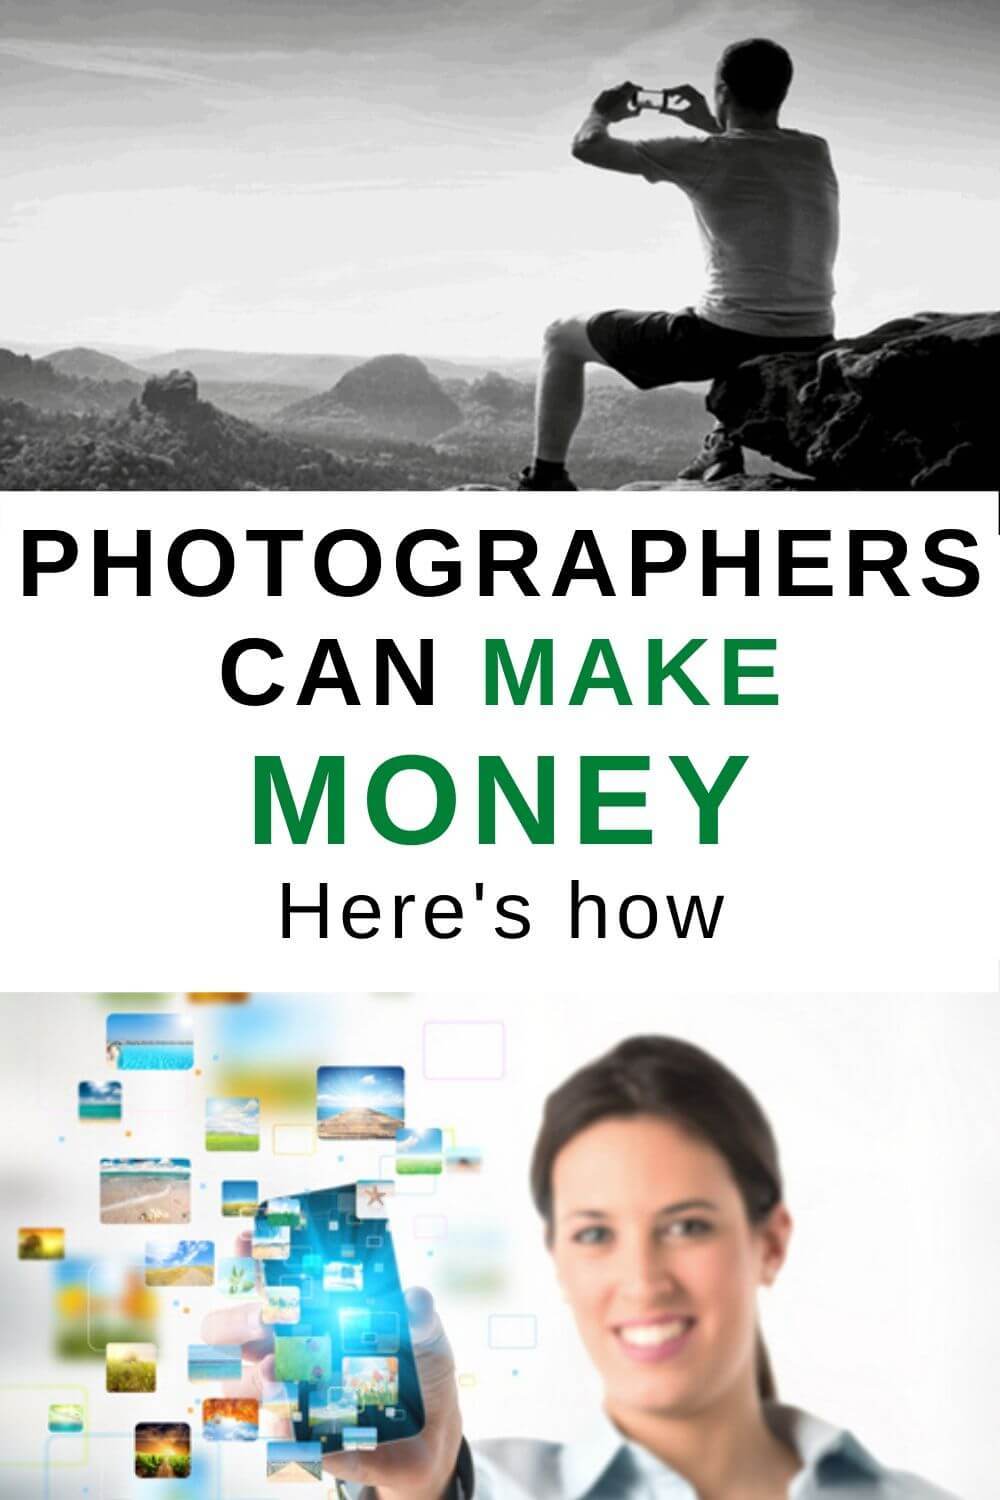 Photographers can make money - here's how